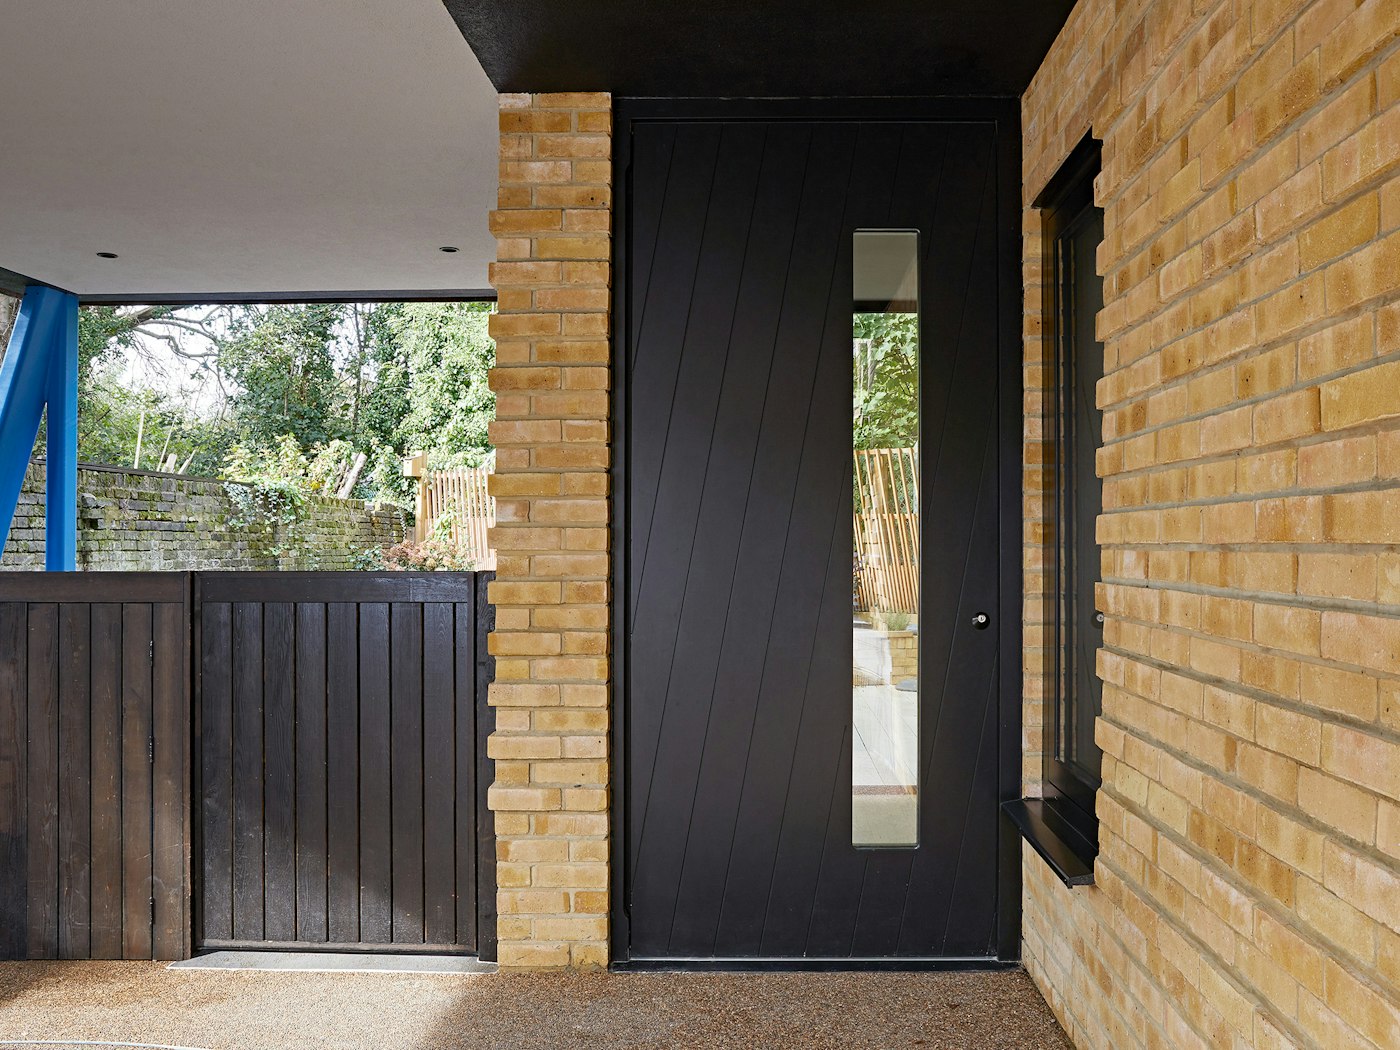 A modified version of our "Terano" design, this painted black door makes a strong first impression